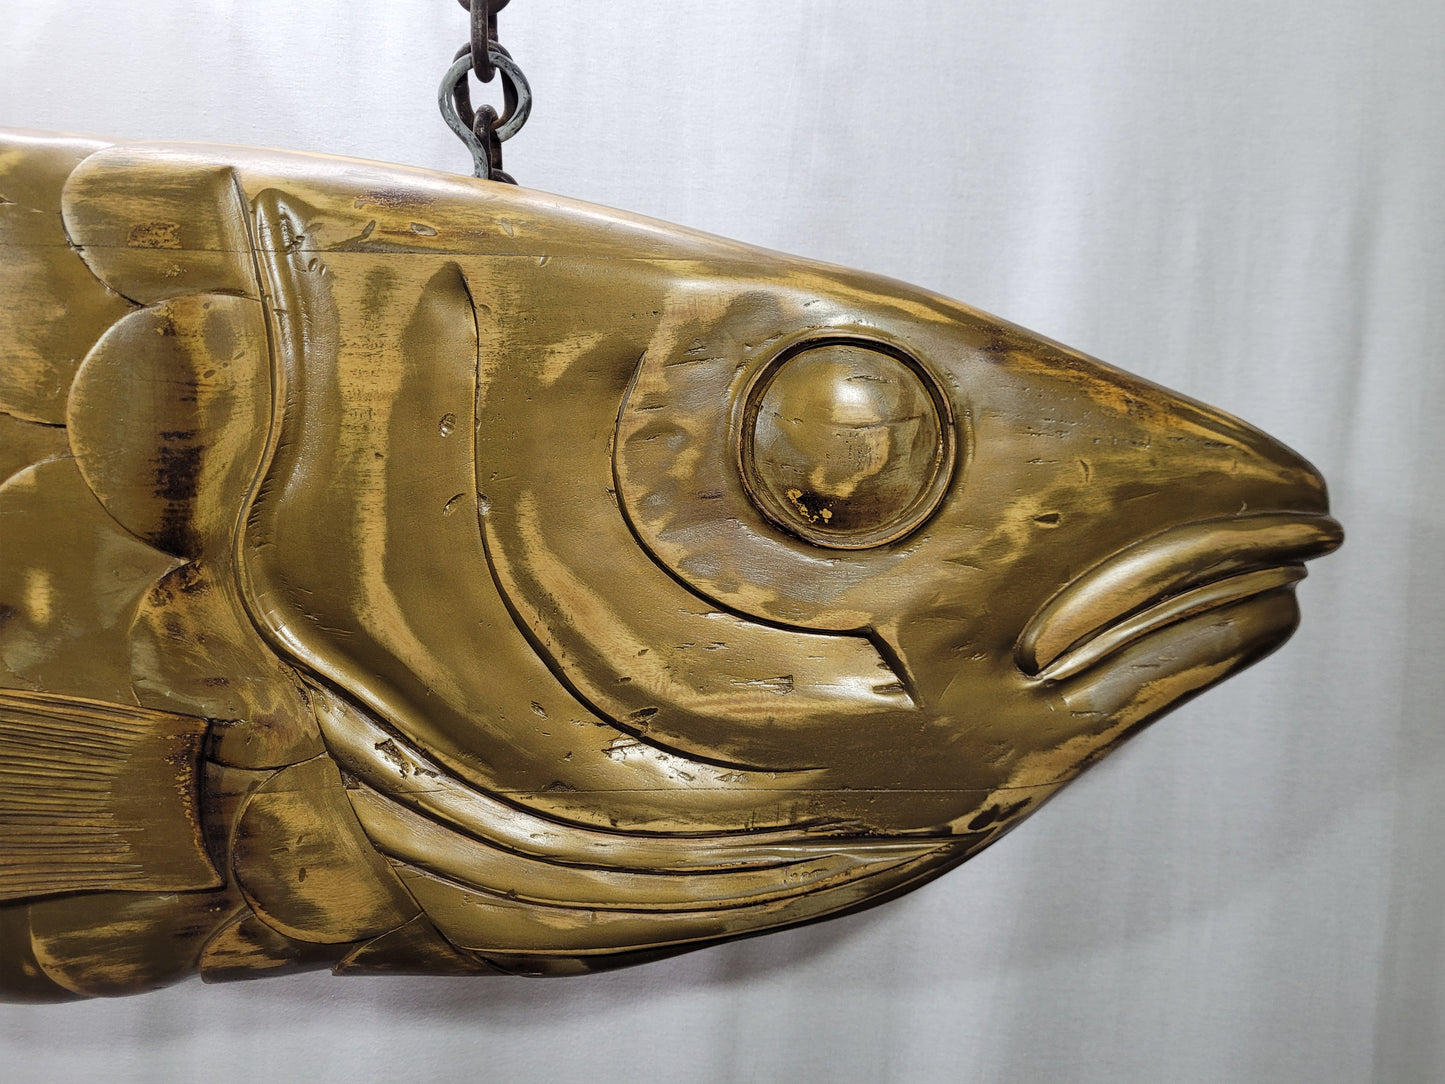 6- Foot Carved Codfish Trade Sign - Lannan Gallery